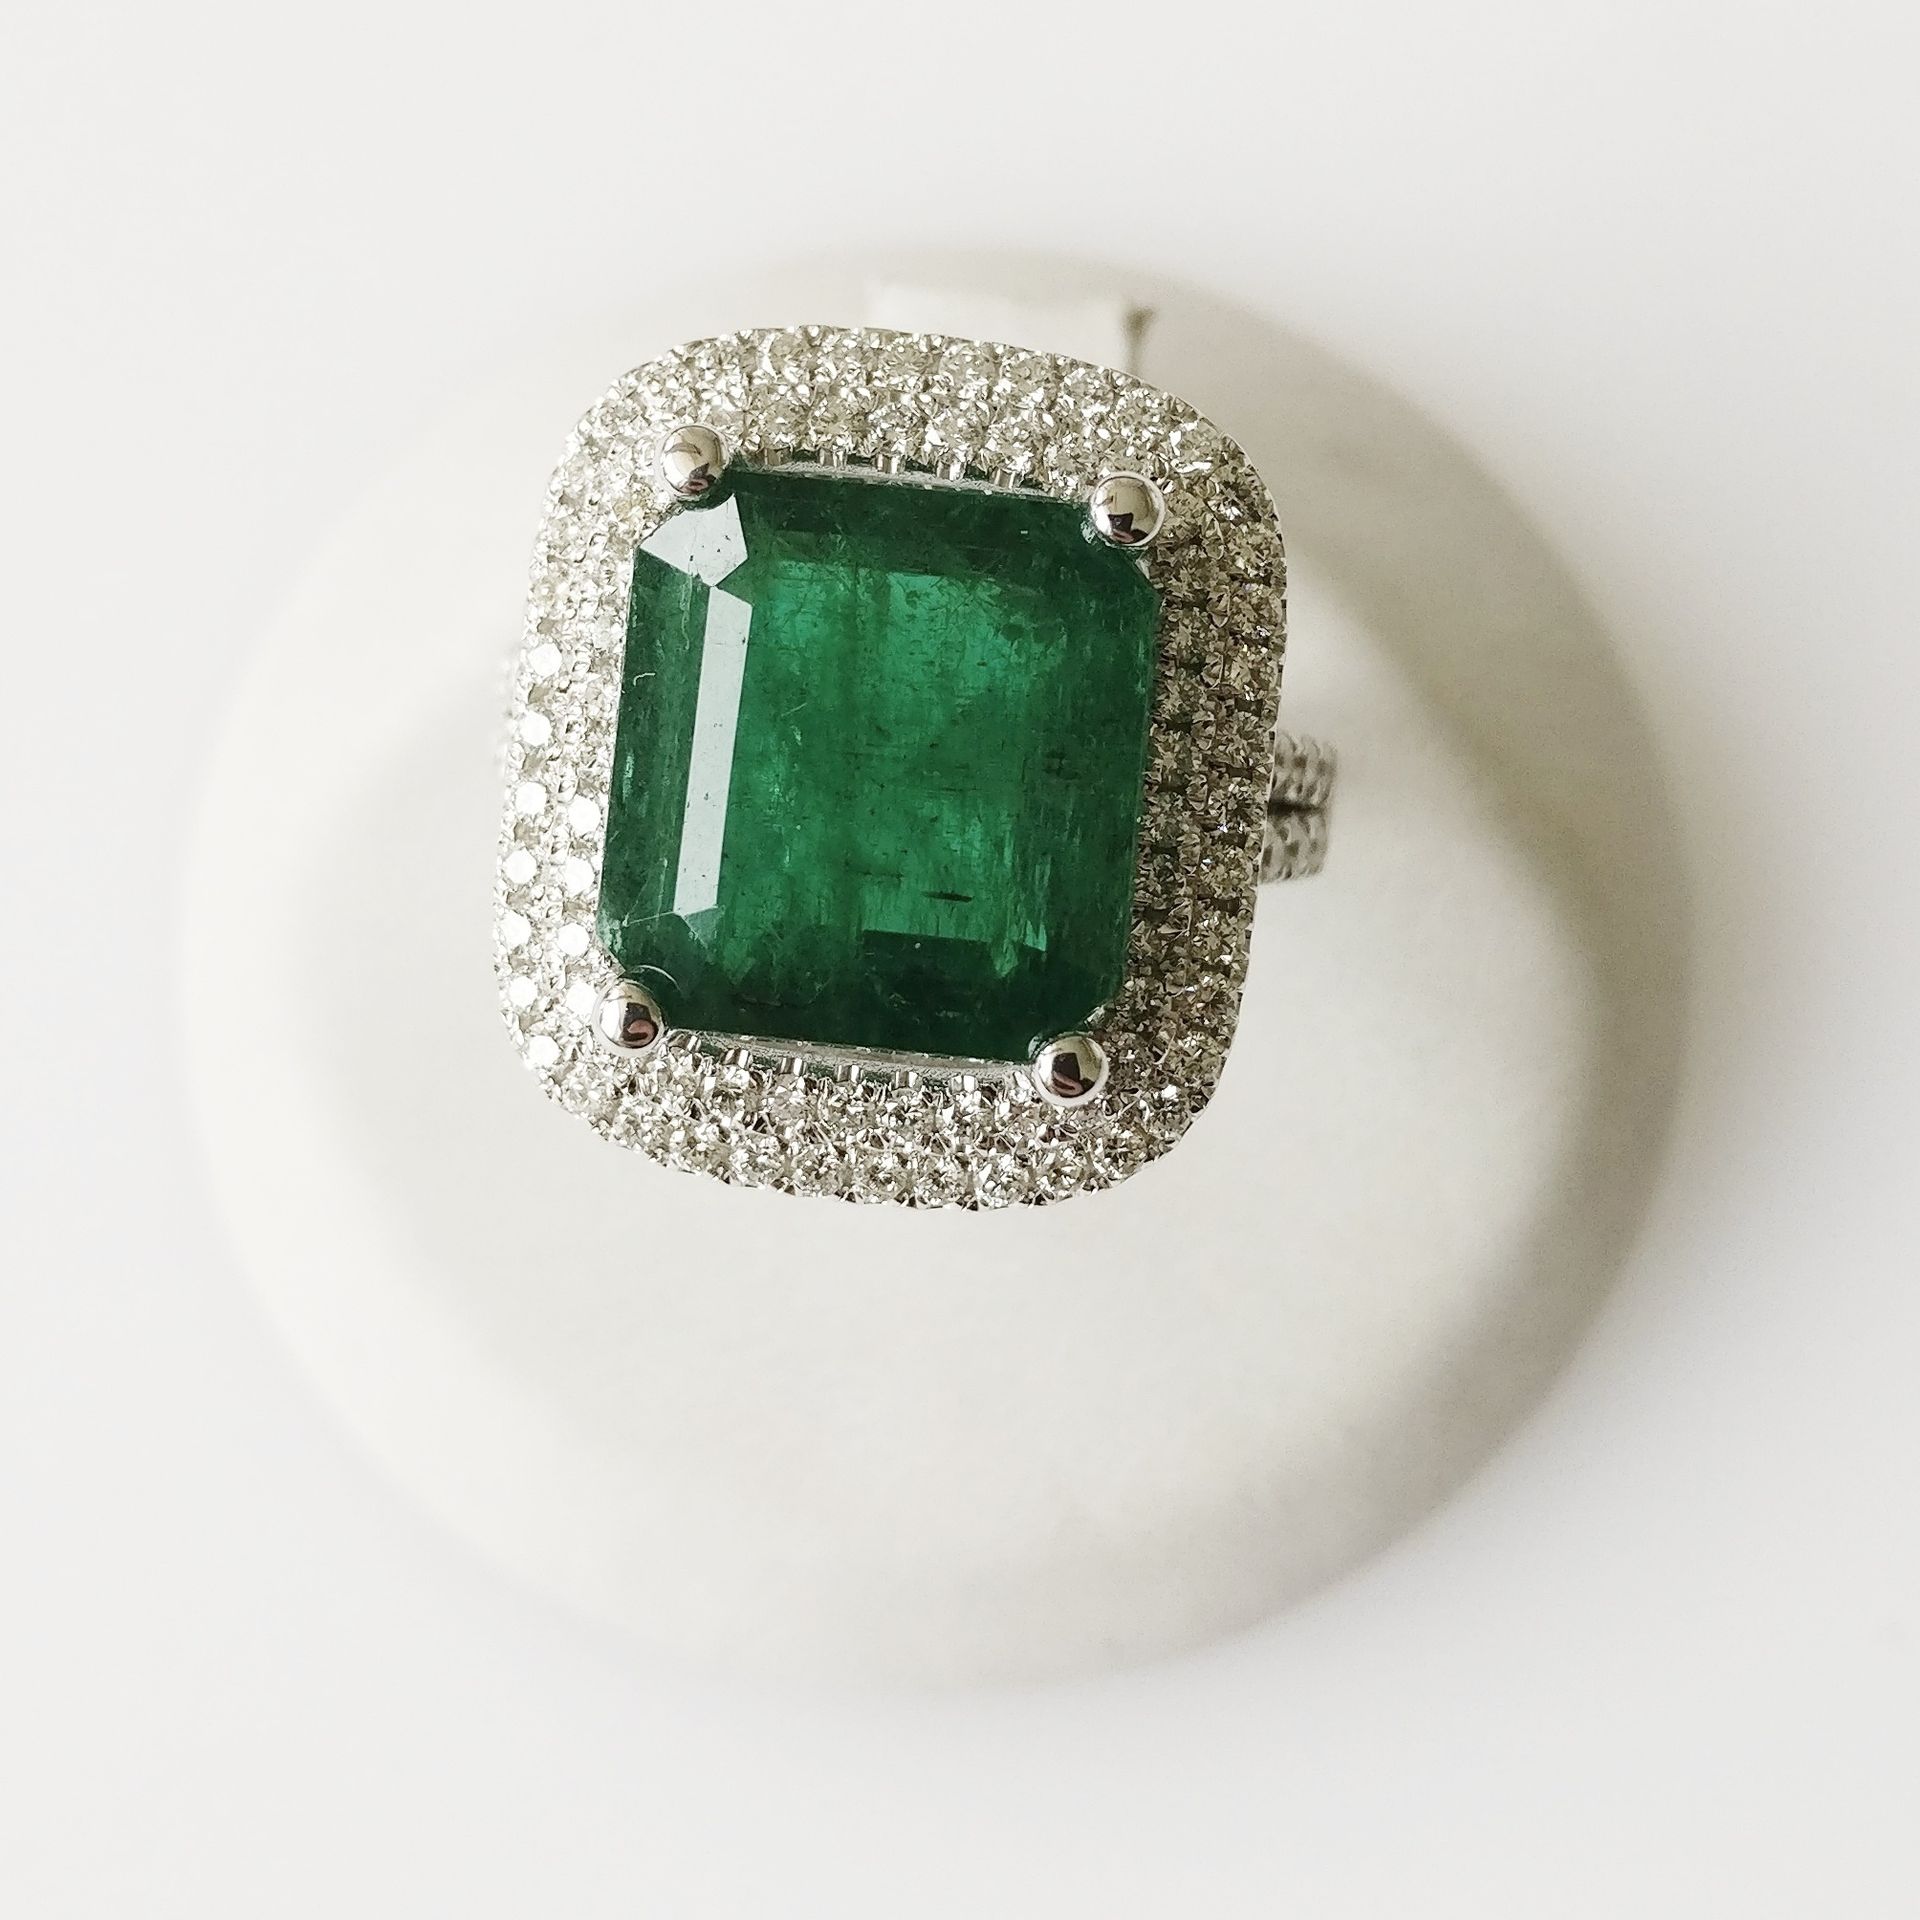 Emerald and Diamond Ring 7.63ct Emerald and Diamond Ring
- Material: 18 kt. Whit&hellip;